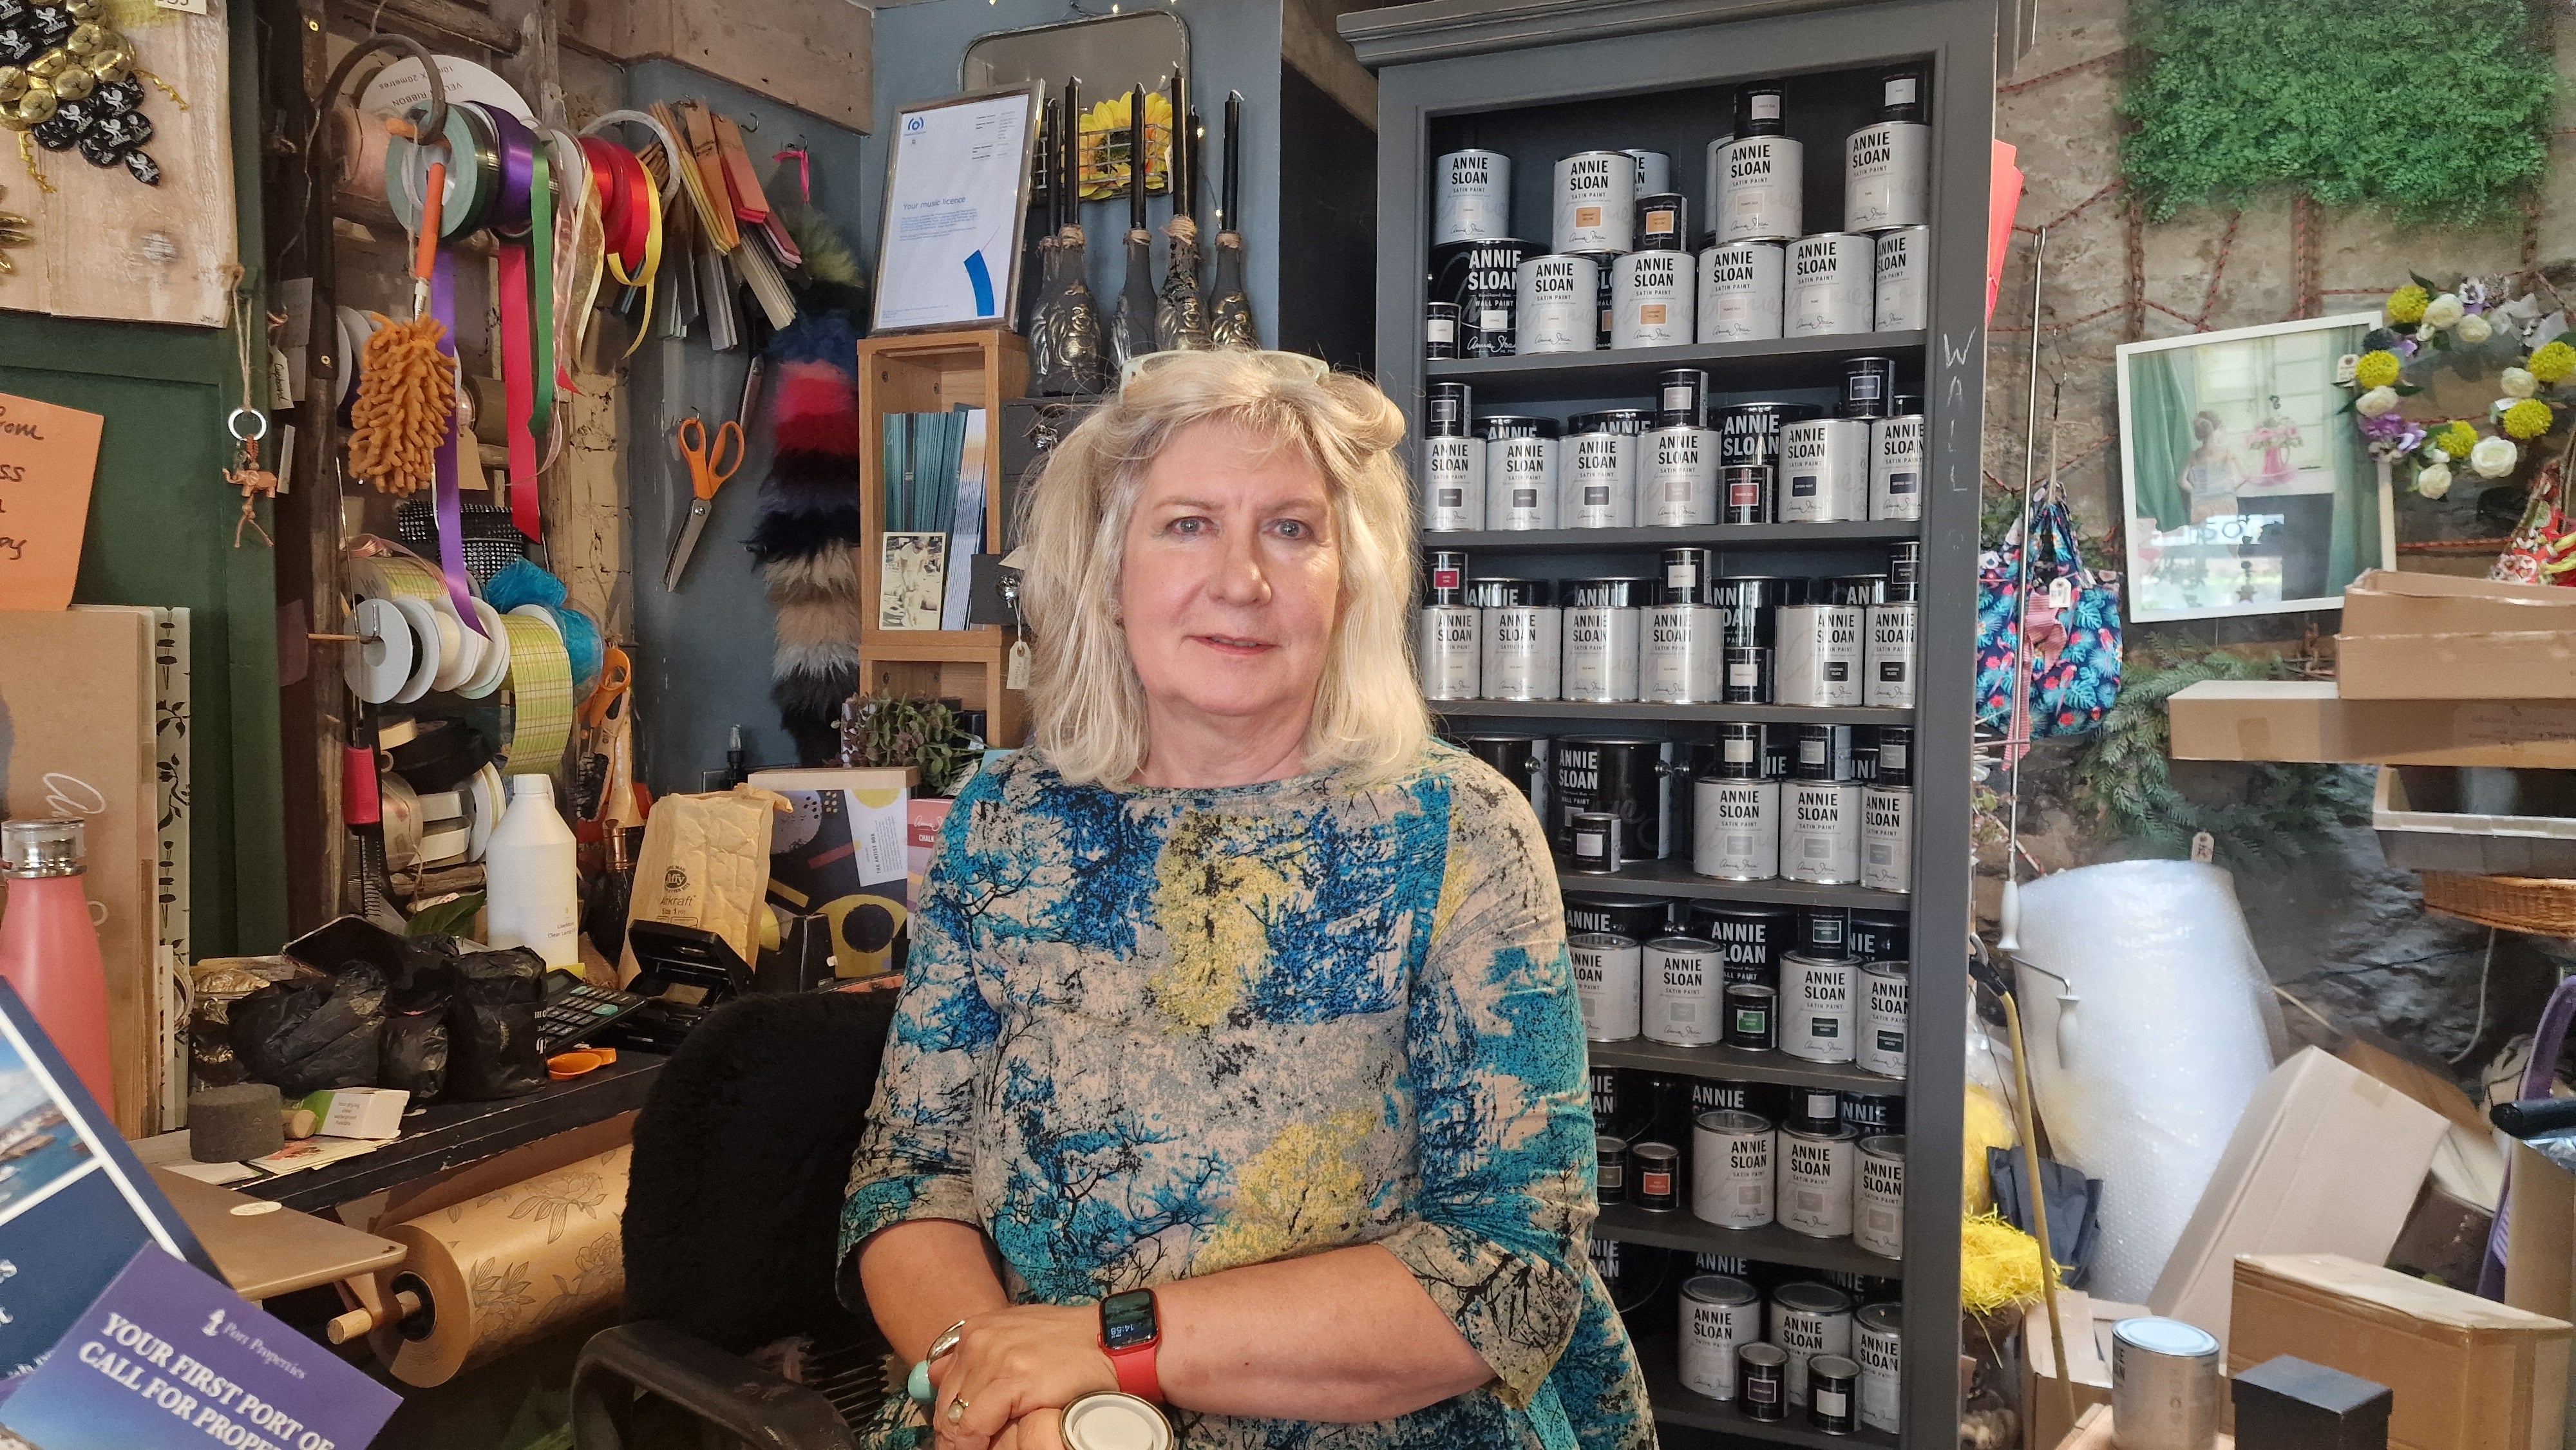 Retailer Sally Dart was scathing about the water company, saying business was 30 to 40 per cent down